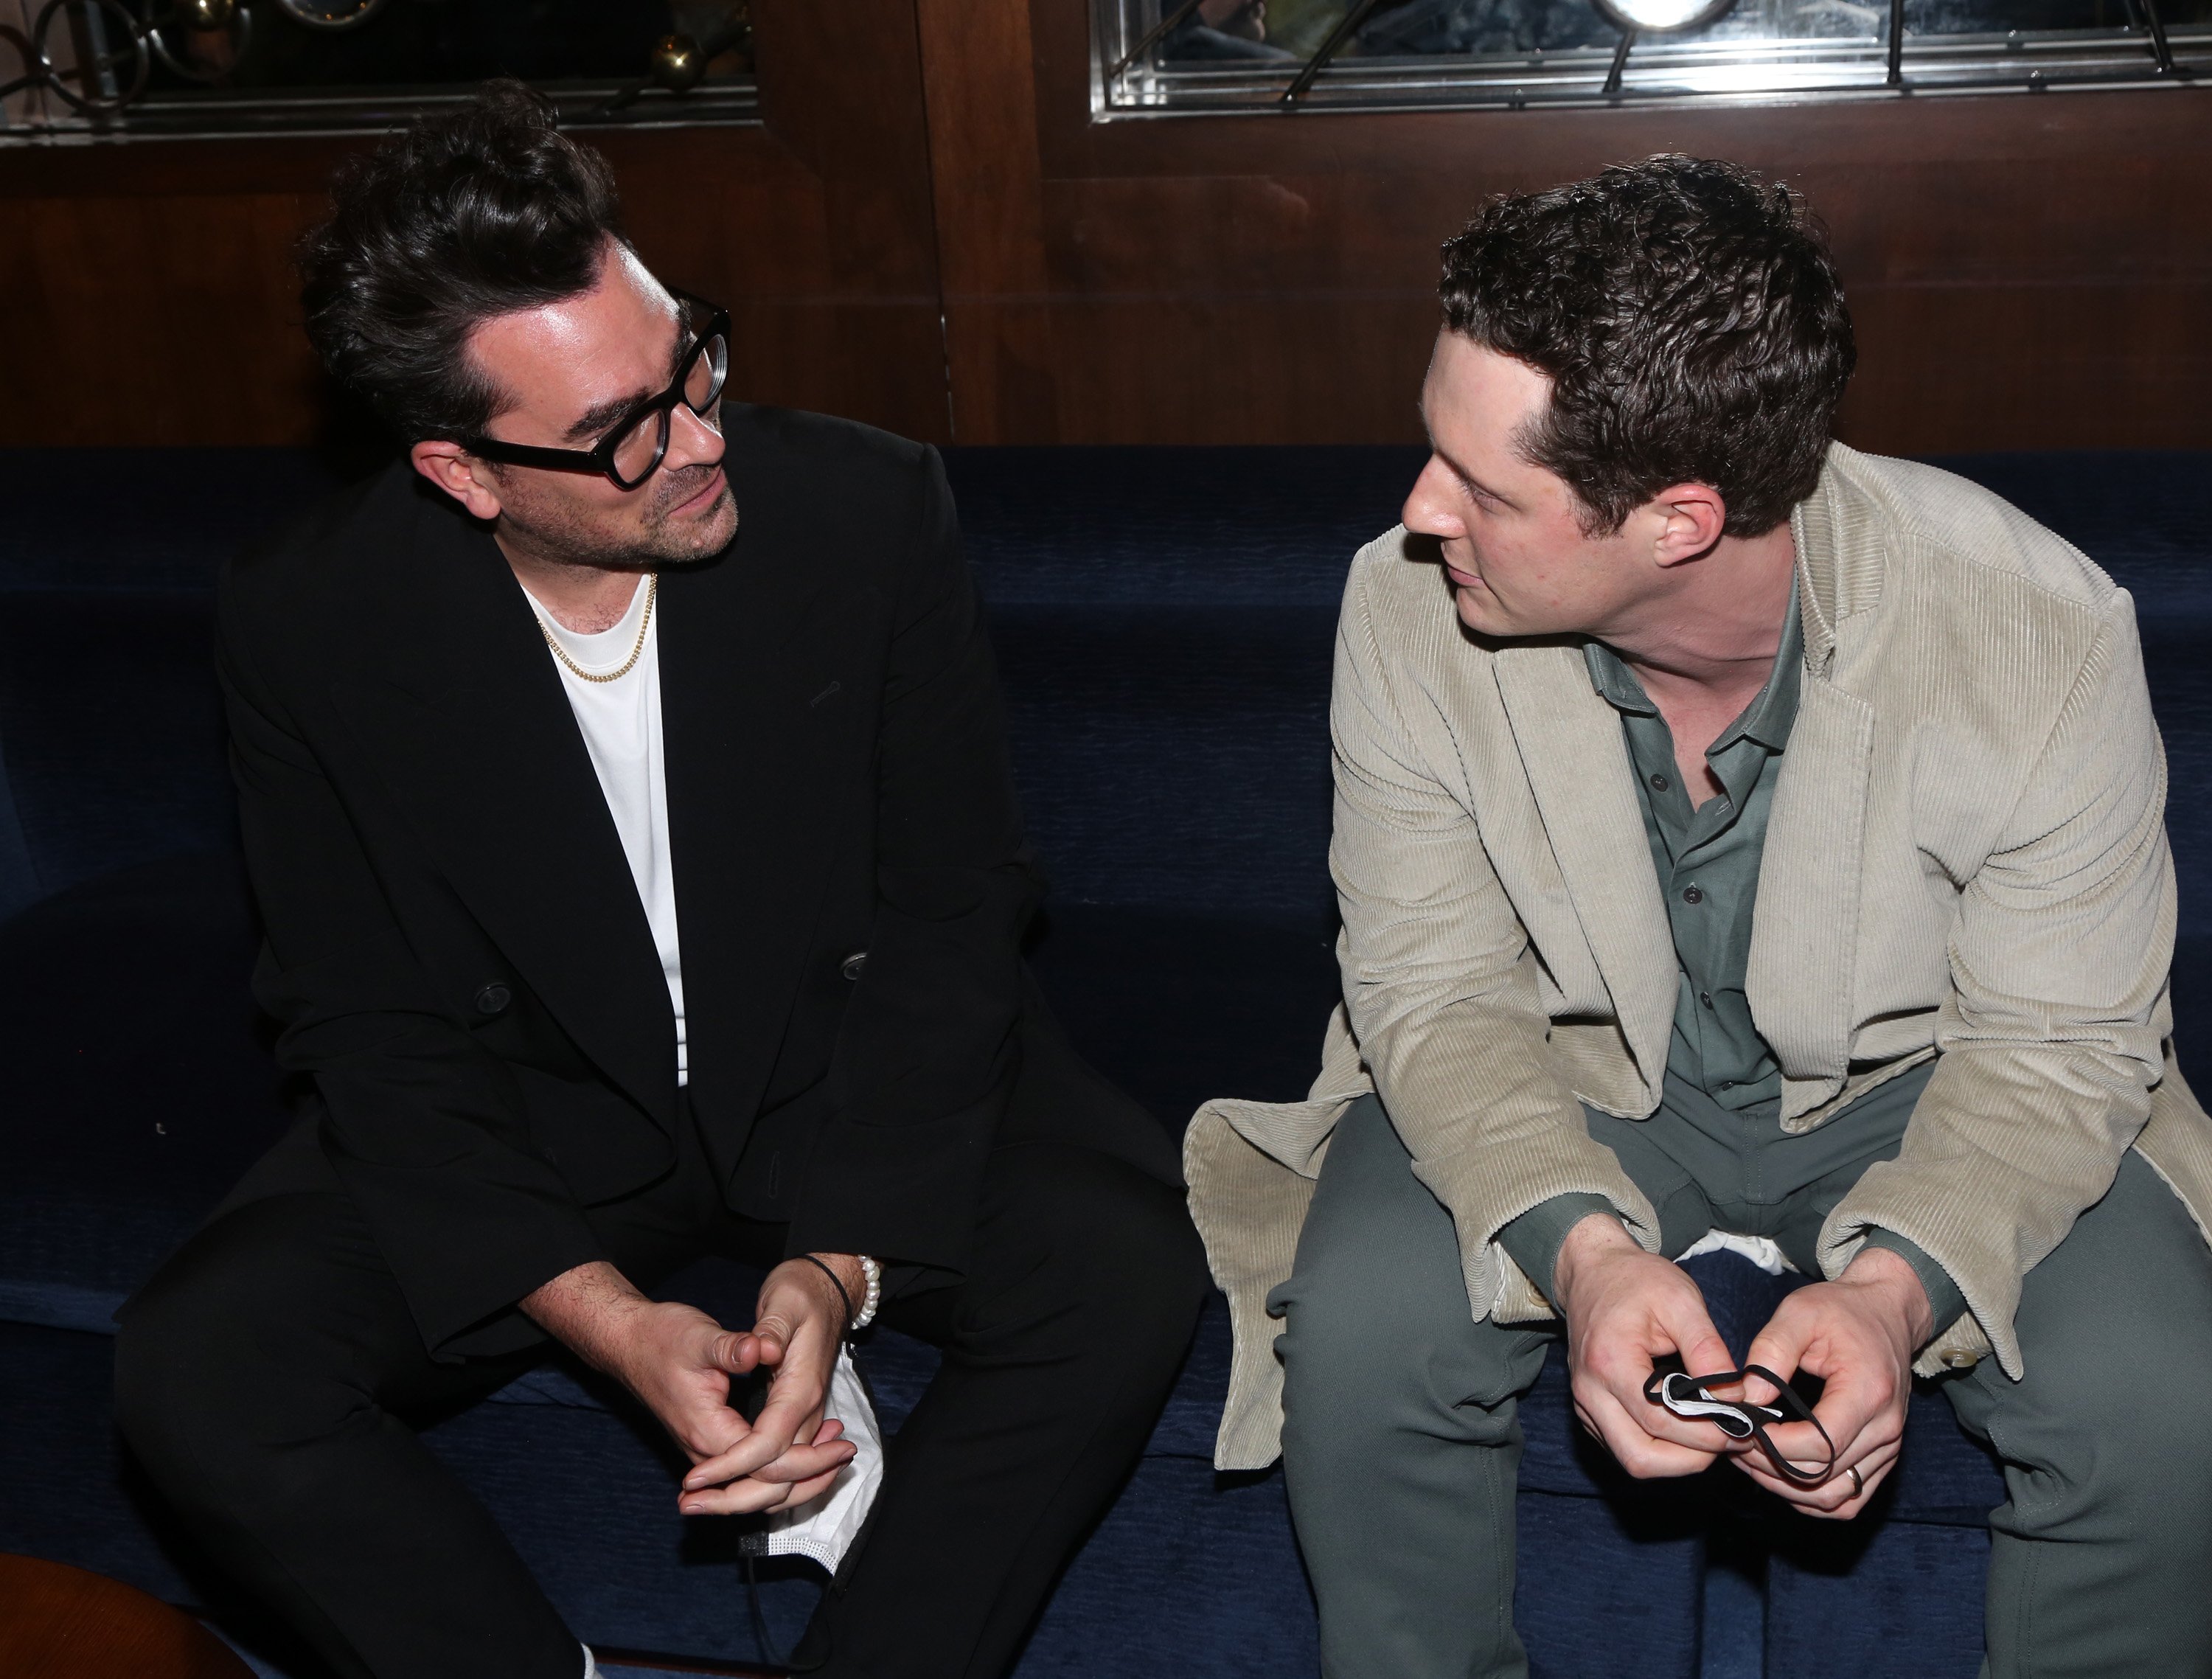 Dan Levy and Noah Reid chatting backstage at the opening night of "The Minutes" on Broadway in New York City | Source: Getty Images